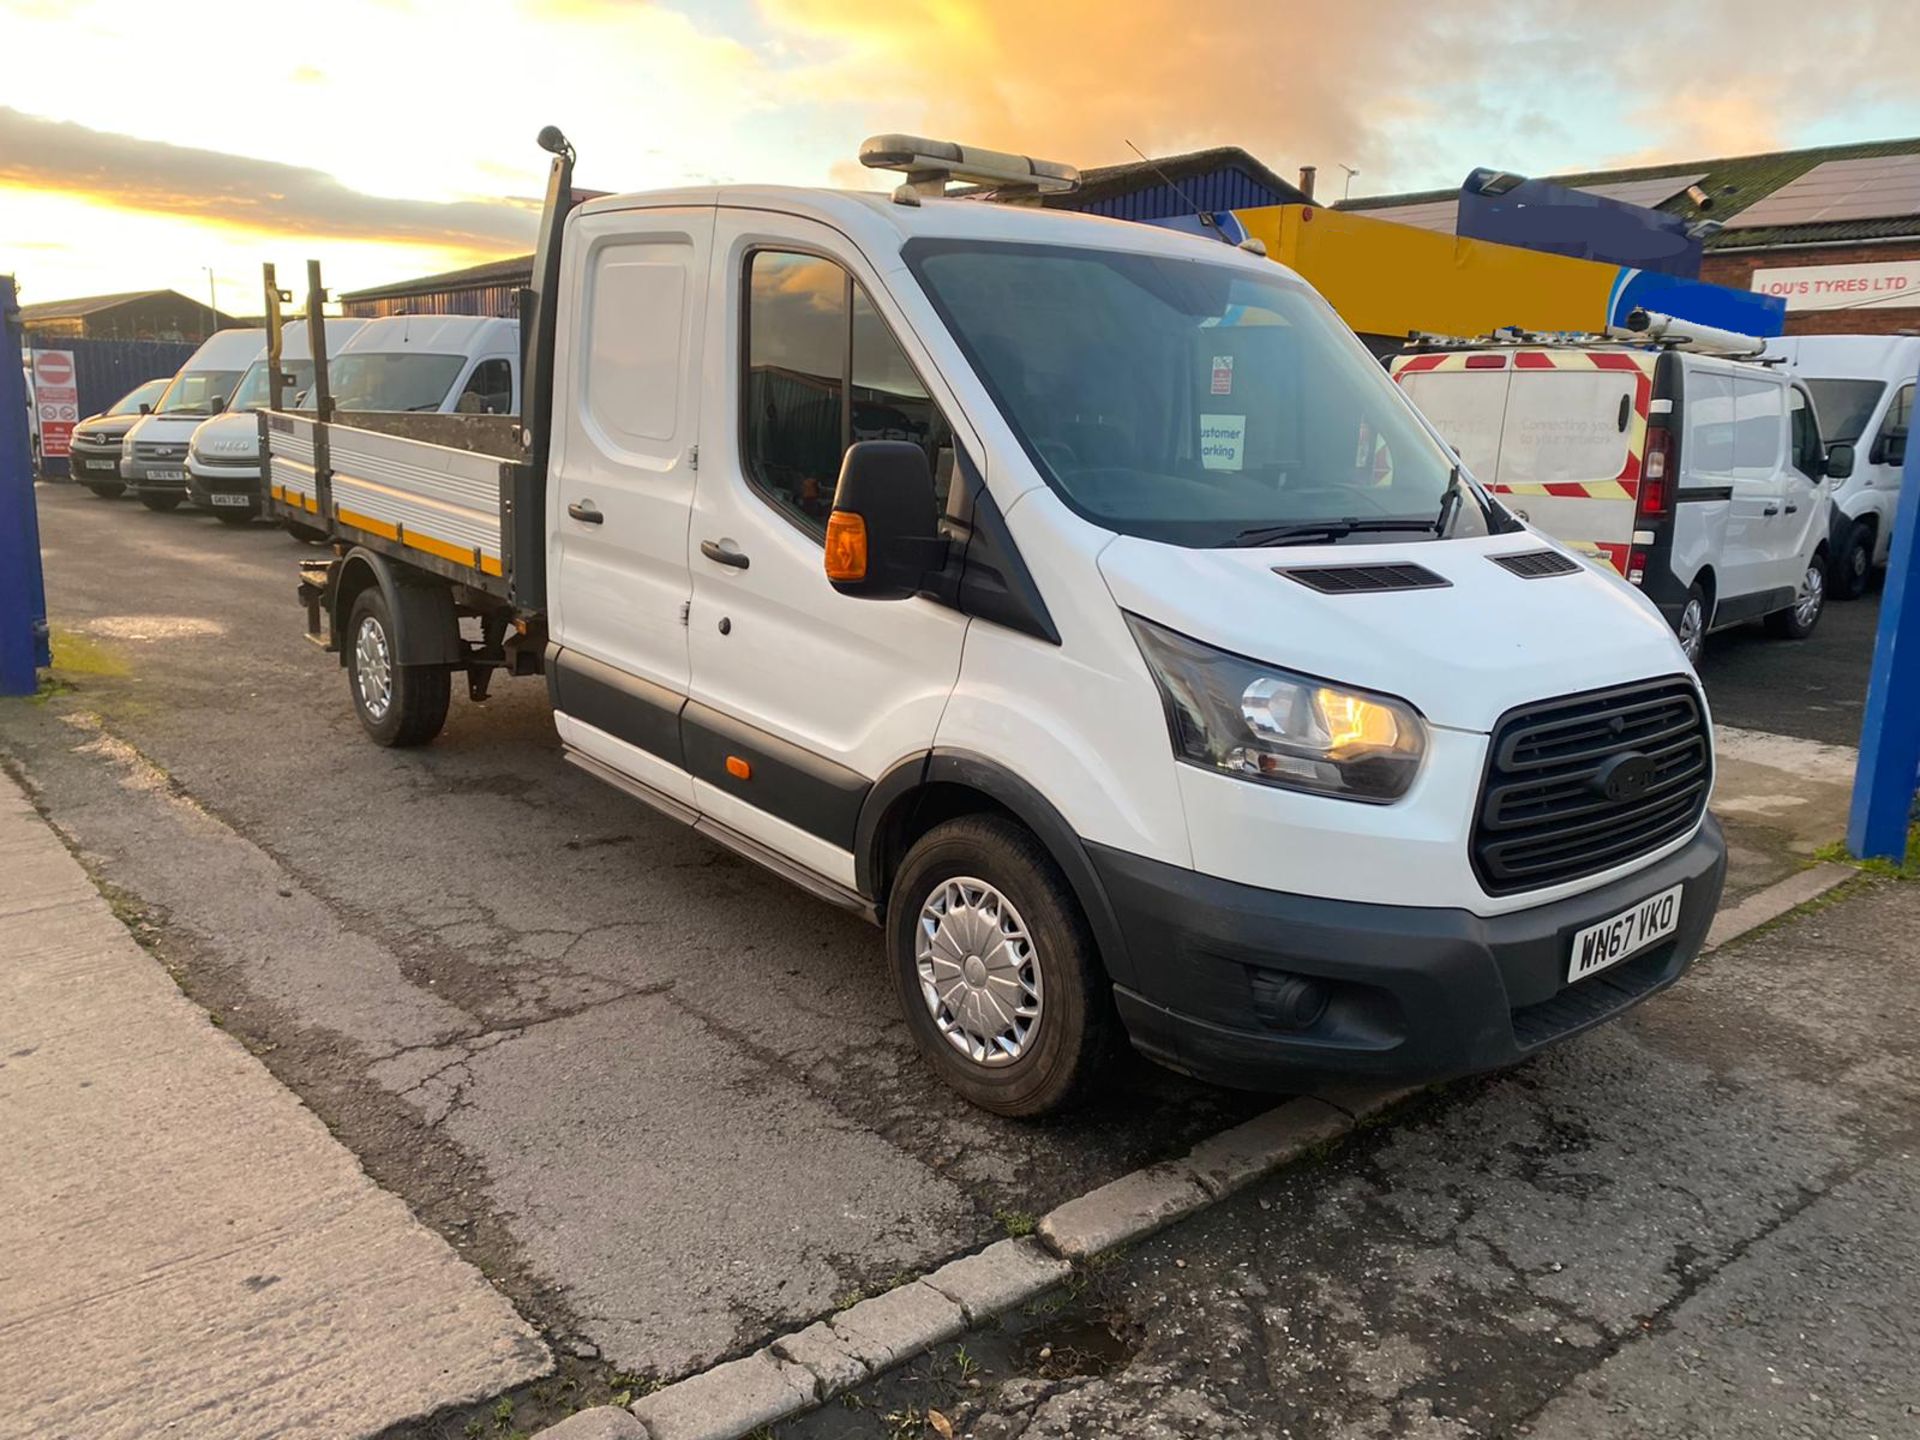 2017 67 FORD TRANSIT CREW CAB TIPPER -110K MILES - EURO 6 - FACTORY TIPPER BODY - RWD